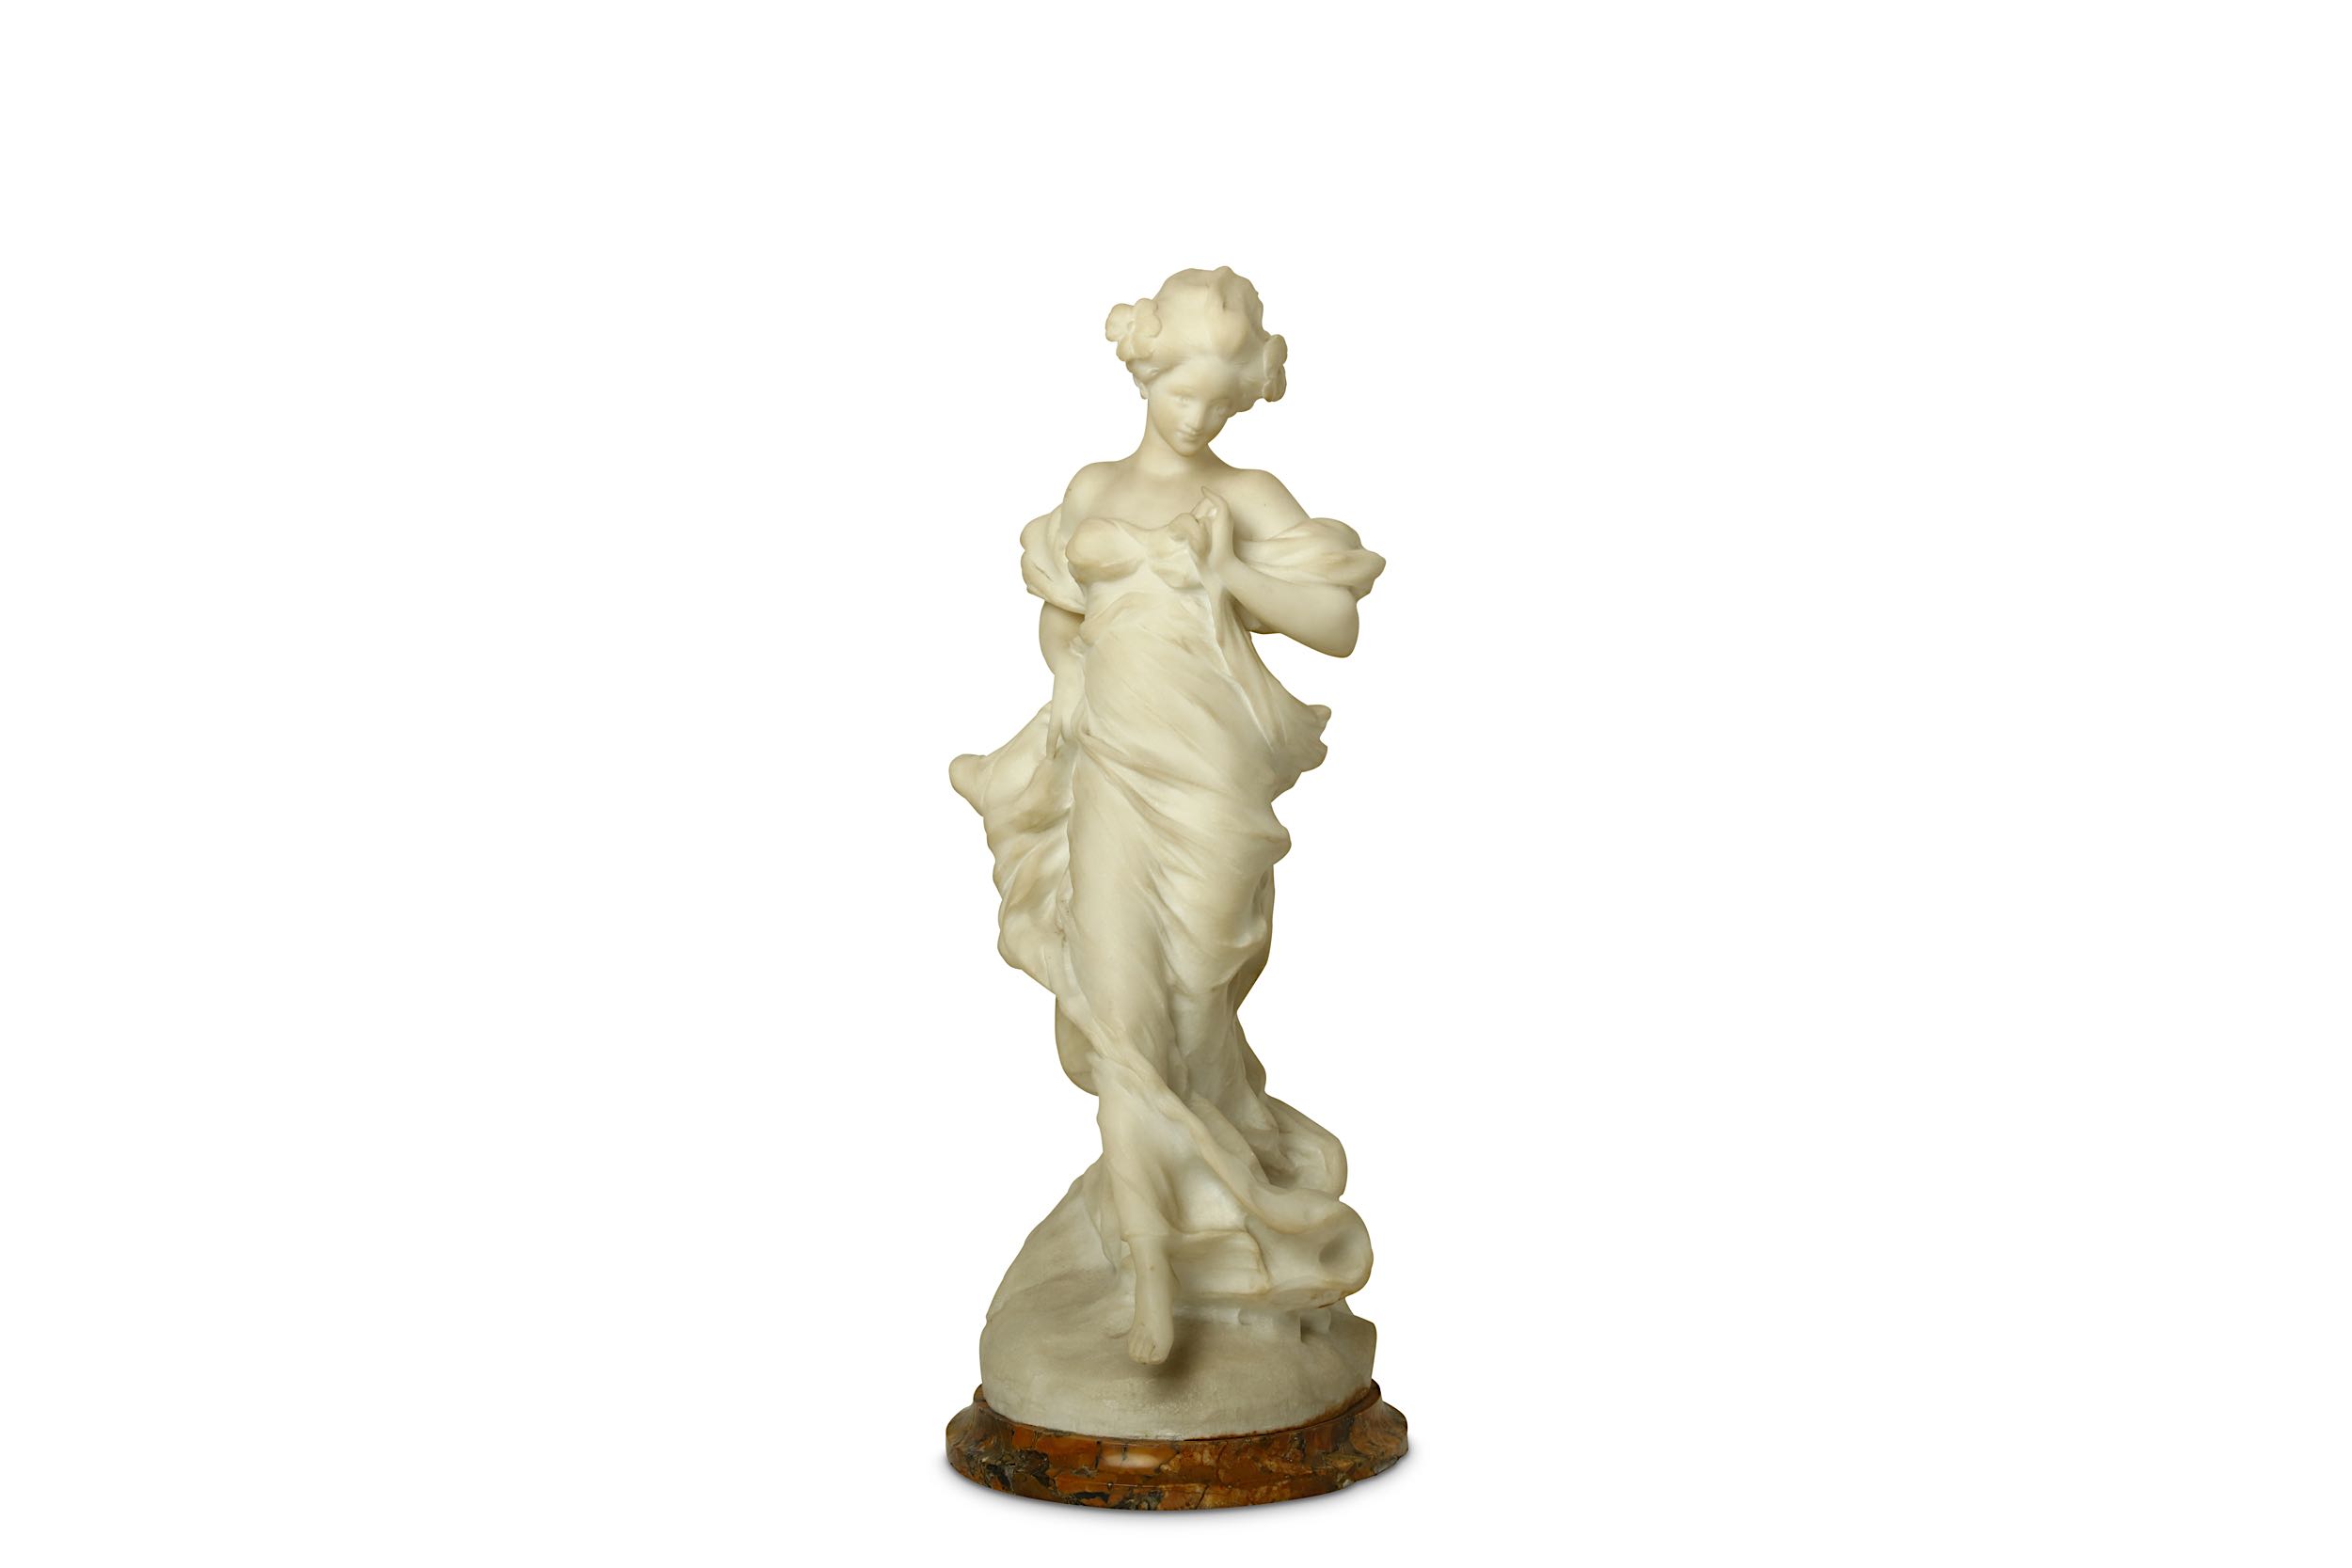 EDOUARD FORTINY (fl.1870-1920), A FRENCH CARVED MARBLE FIGURE OF A LADY.